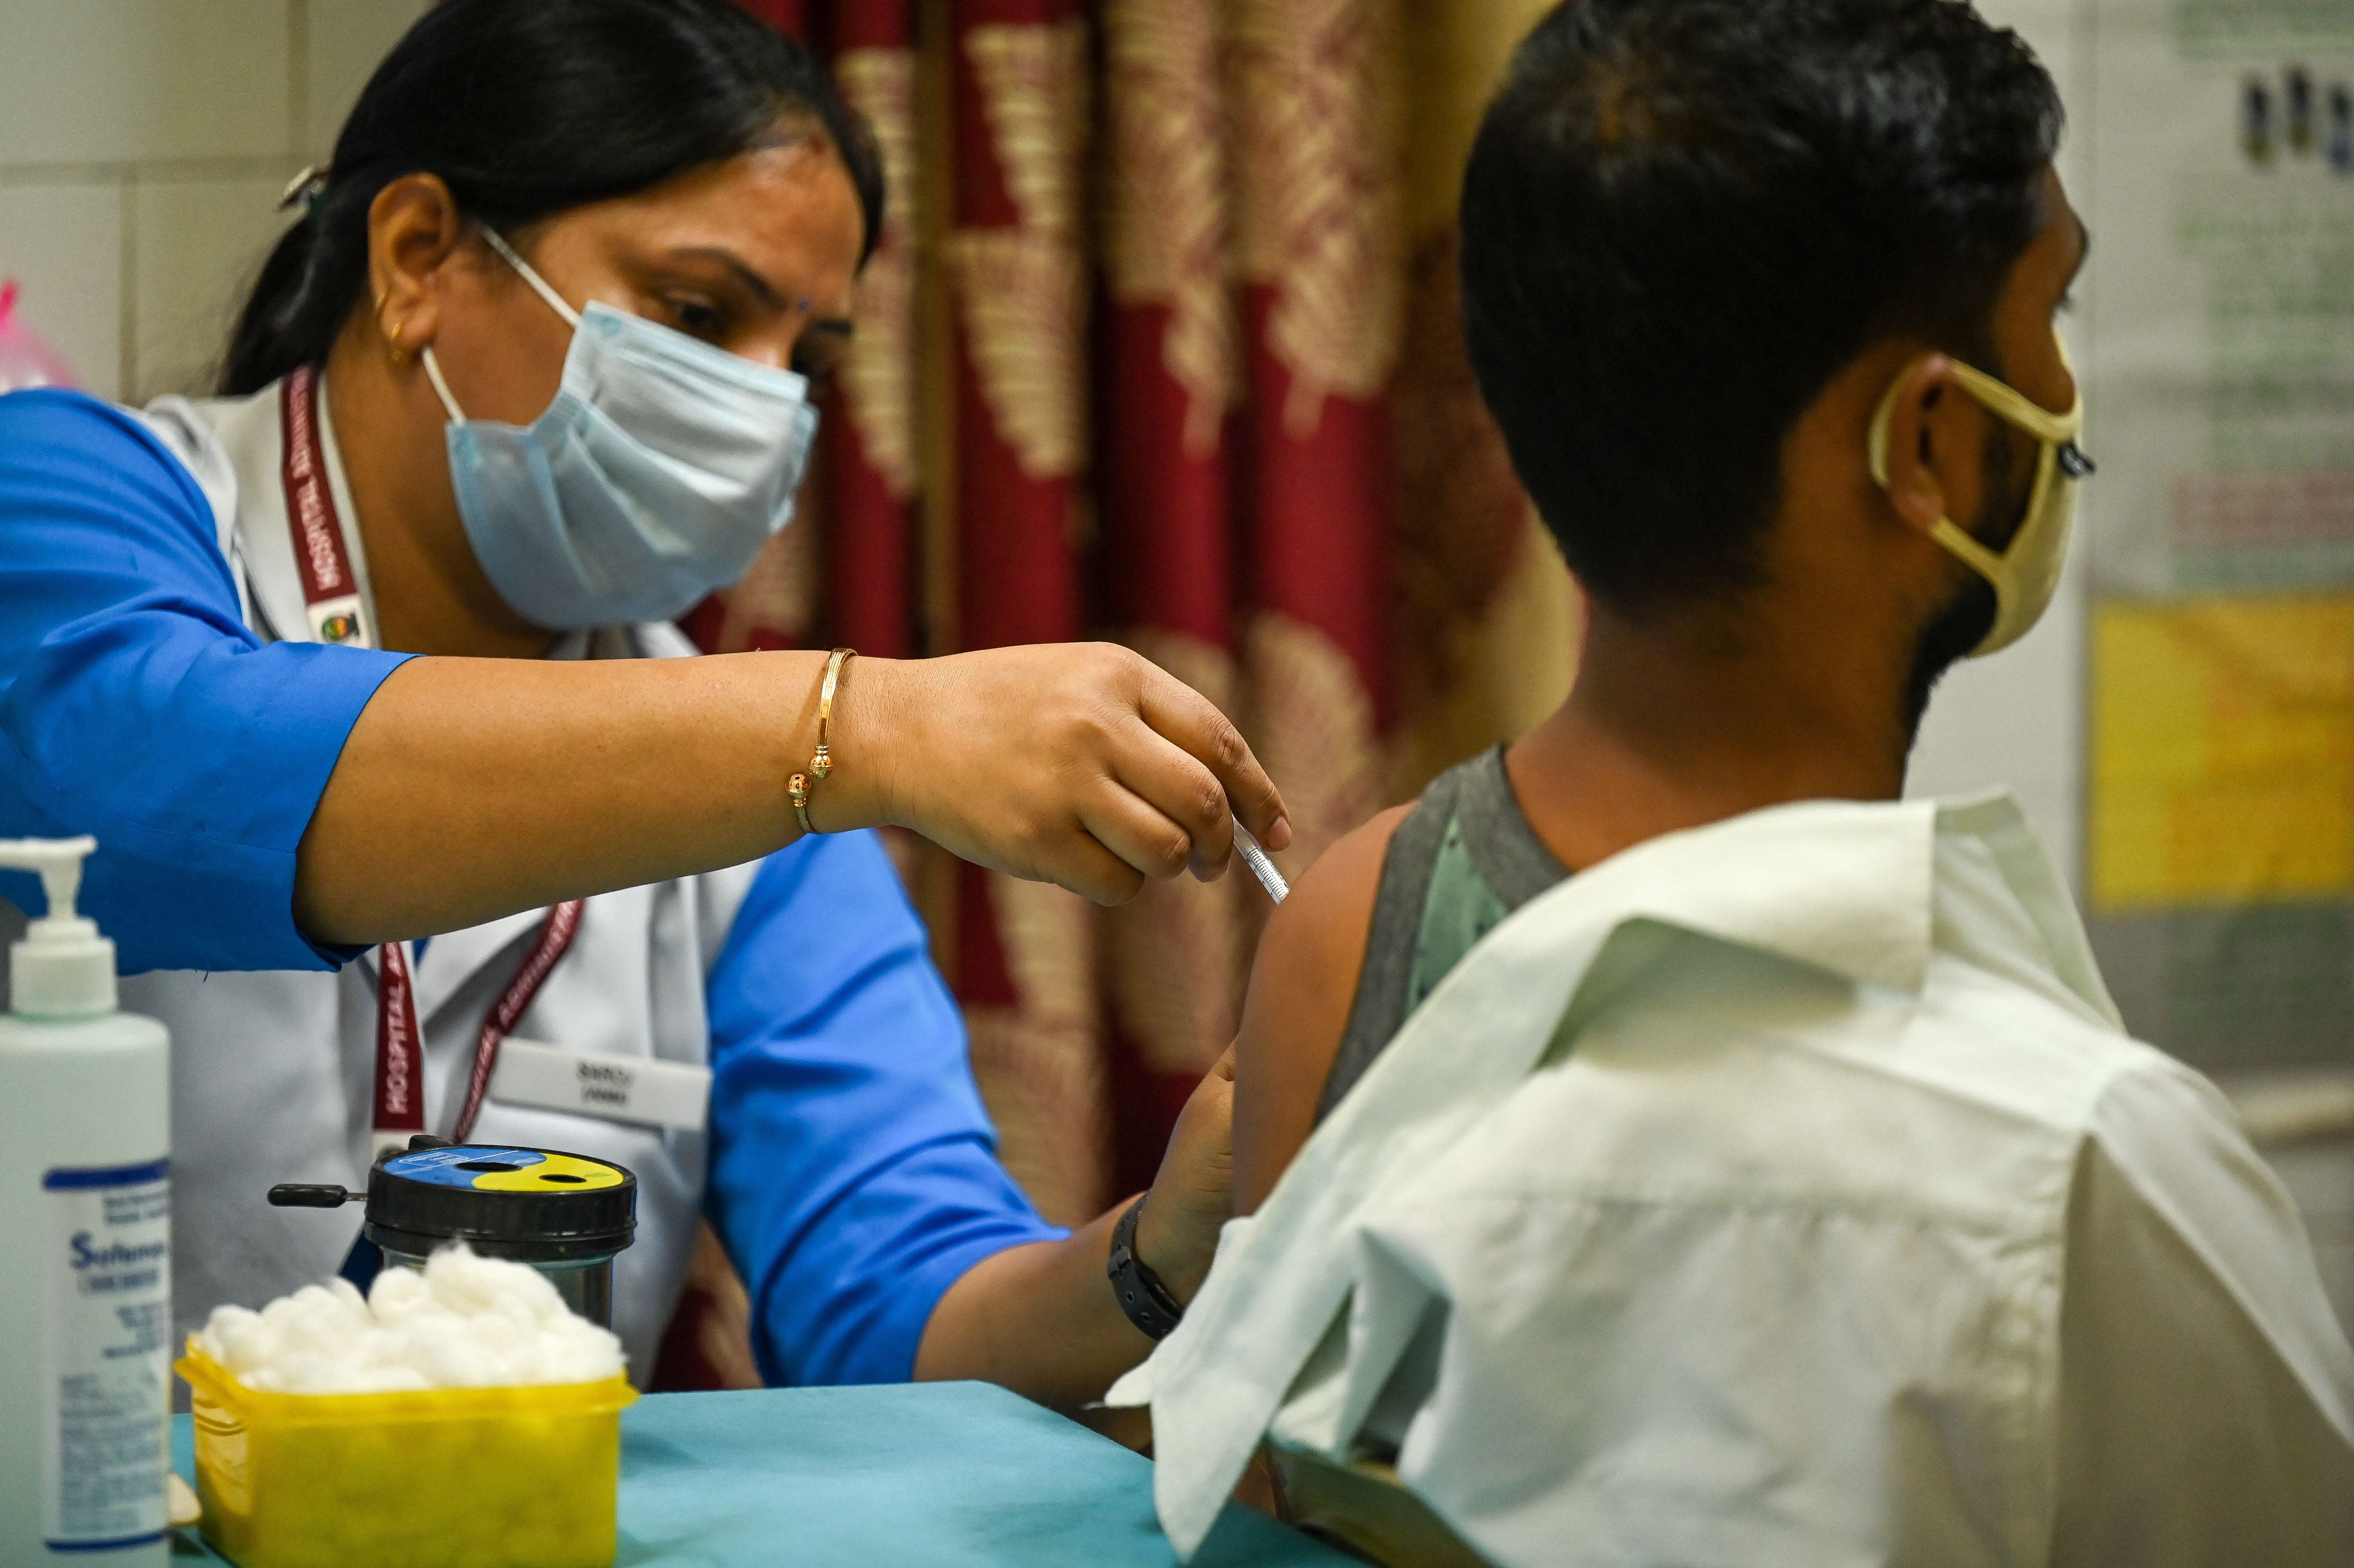 File. A health worker inoculates a man with a dose of the Covaxin vaccine against the Covid-19 coronavirus at a health centre in New Delhi on 21 October 2021